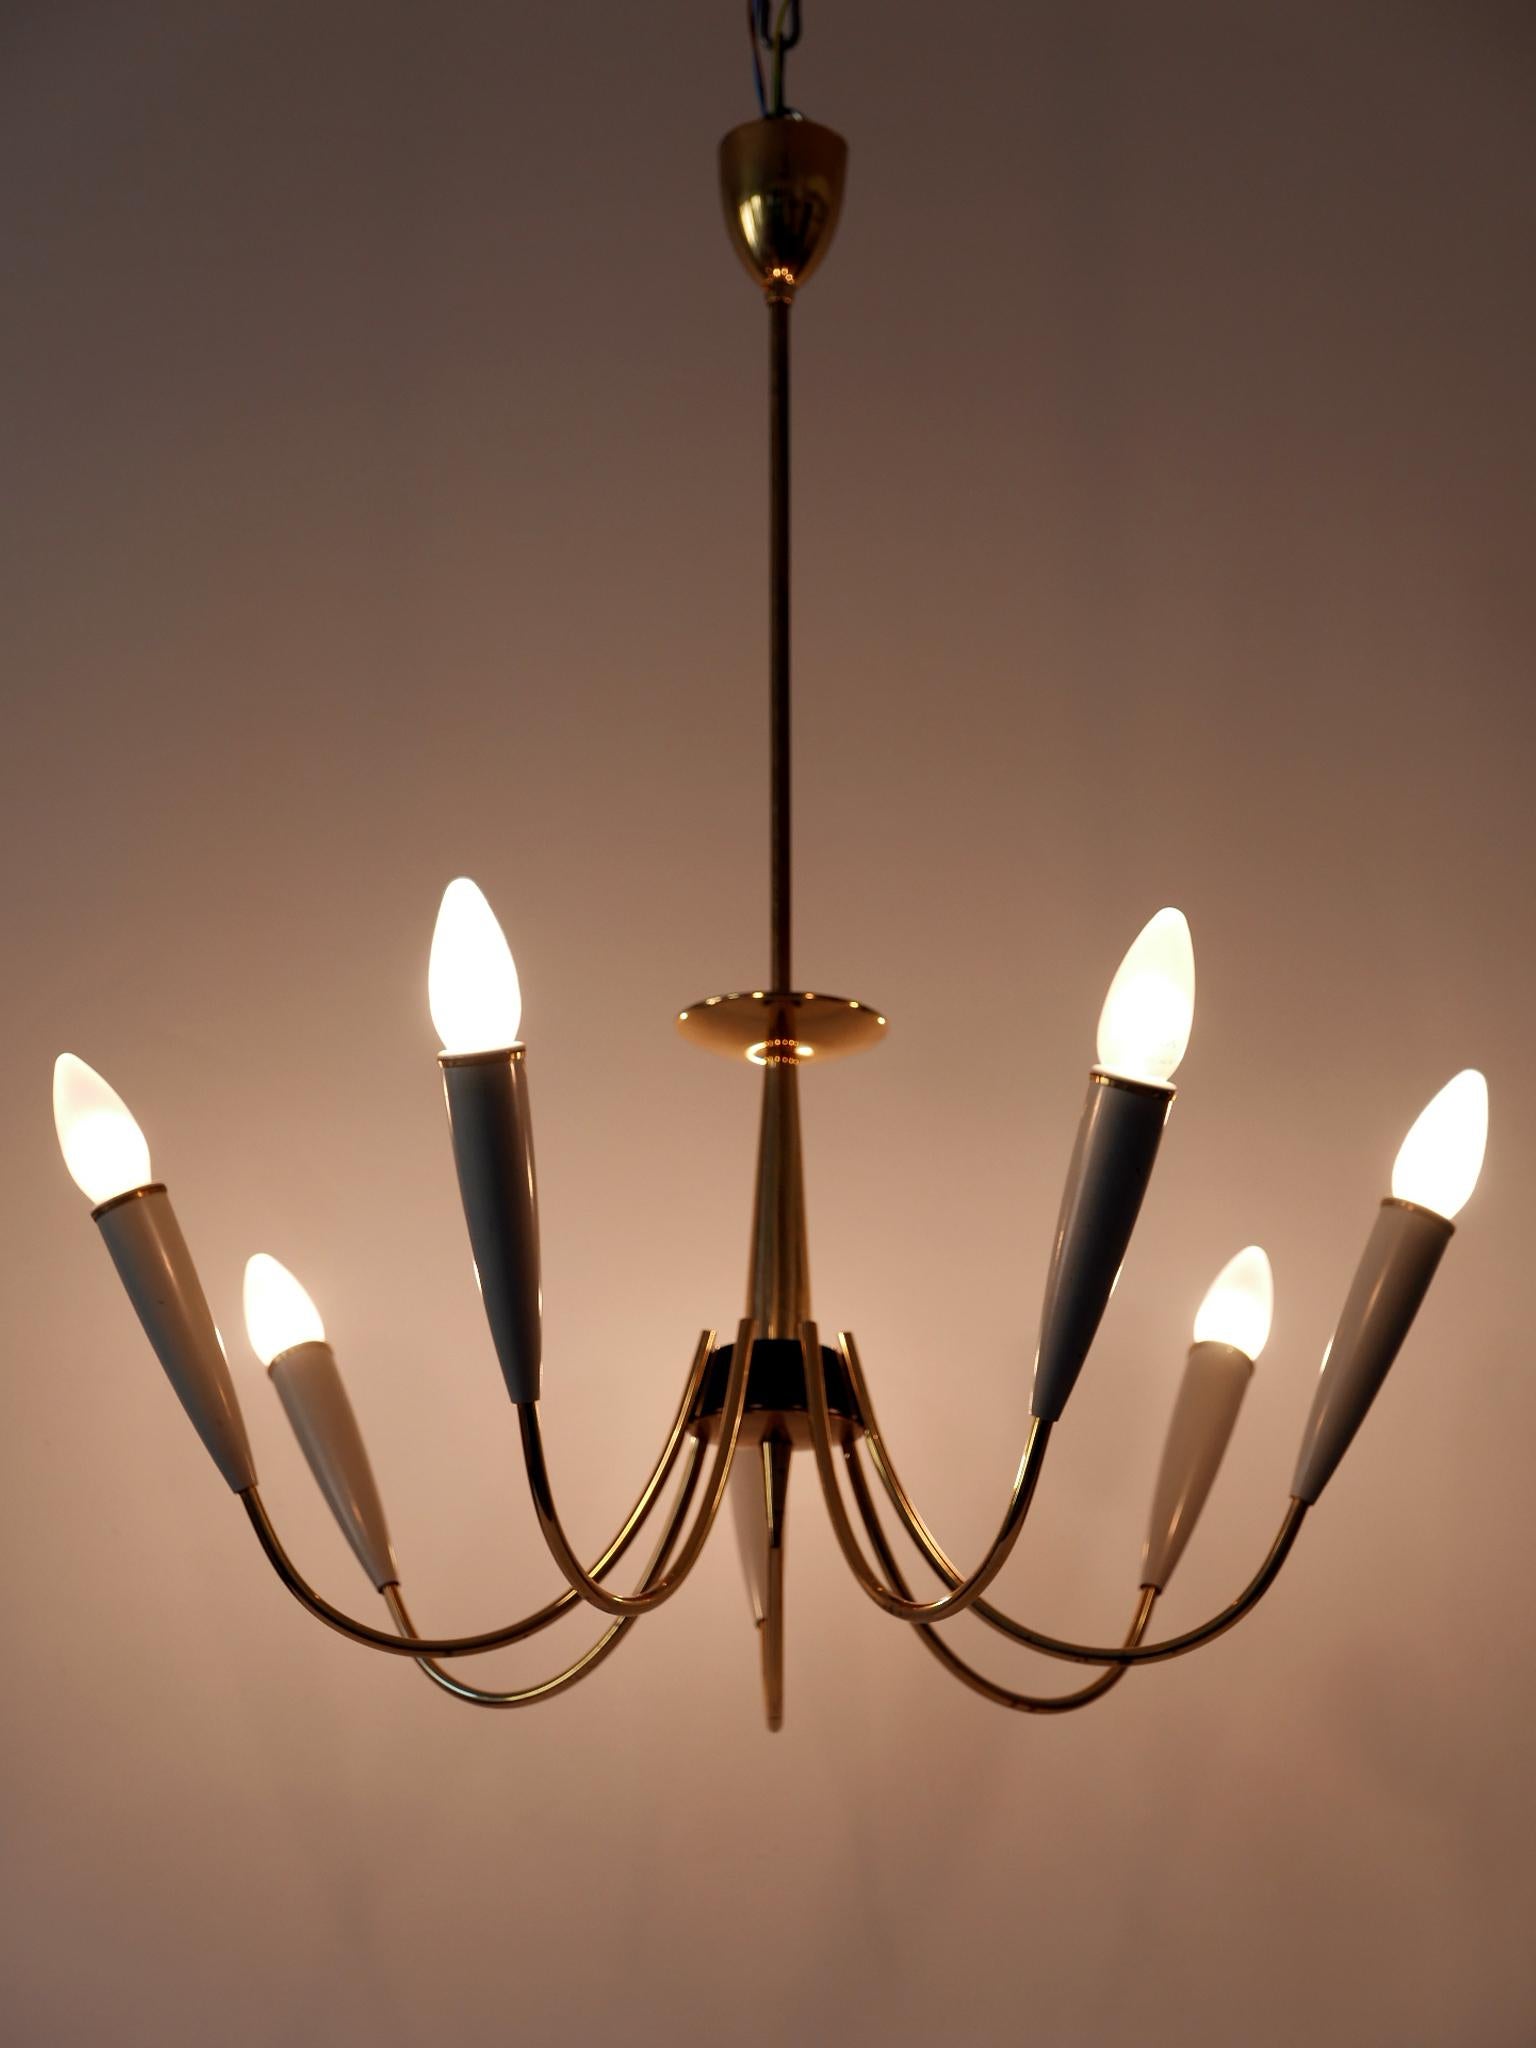 Elegant Mid-Century Modern seven-armed sputnik chandelier or pendant lamp. Designed and manufactured in Germany, 1950s.

Executed in brass and bakelite, the lamp needs 7 x E14 / E12 Edison screw fit bulbs. It is wired, in working condition and